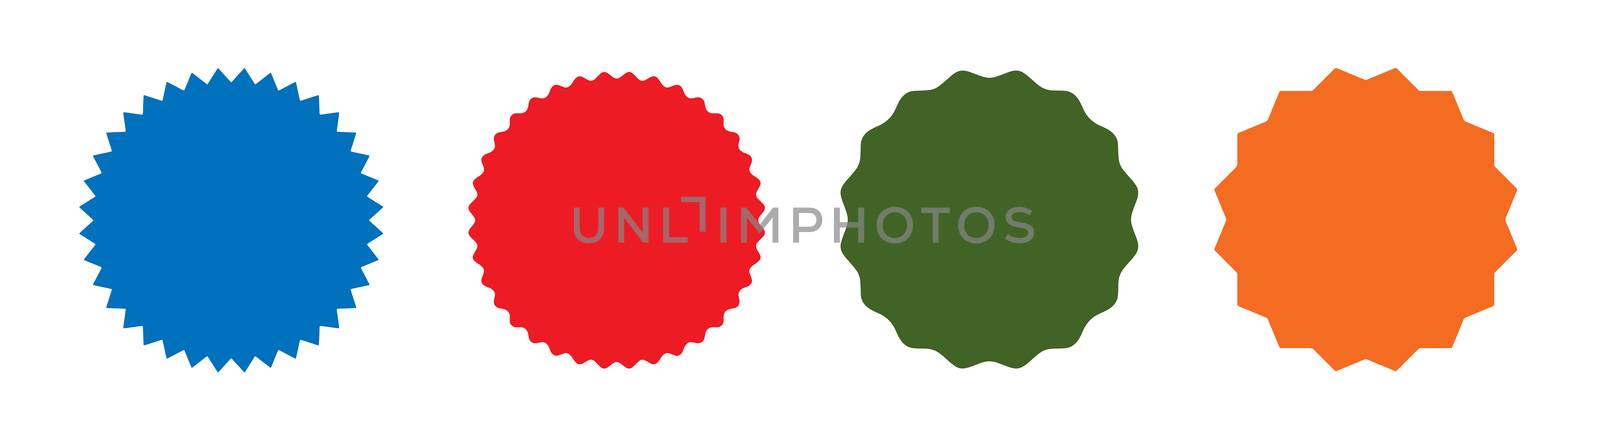 Close up for different colorful retro seal stamp badge shapes isolated on white background